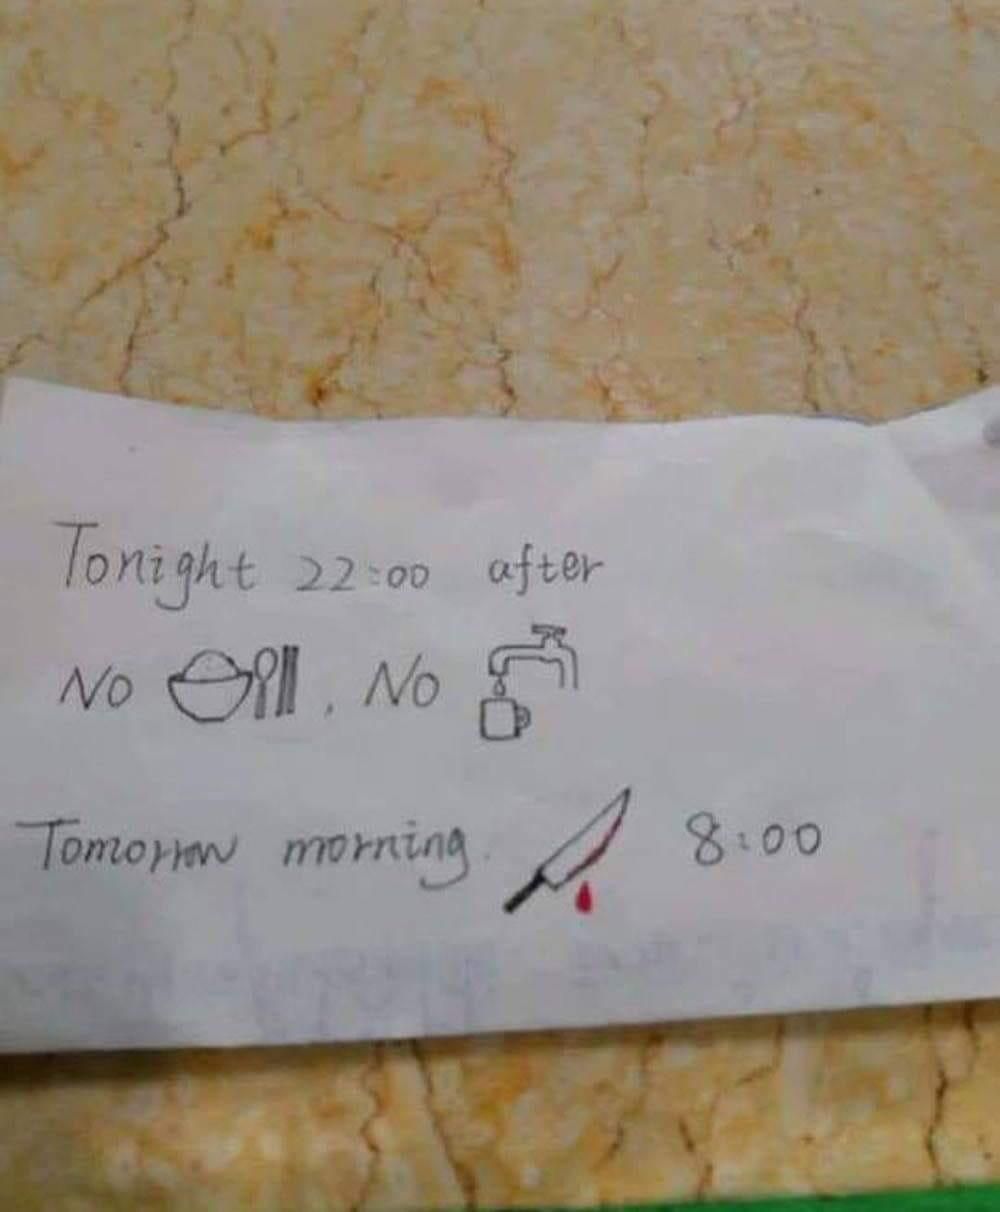 An international student hospitalised in China and the nurse who couldn’t speak English, informed him about his surgery with this note.